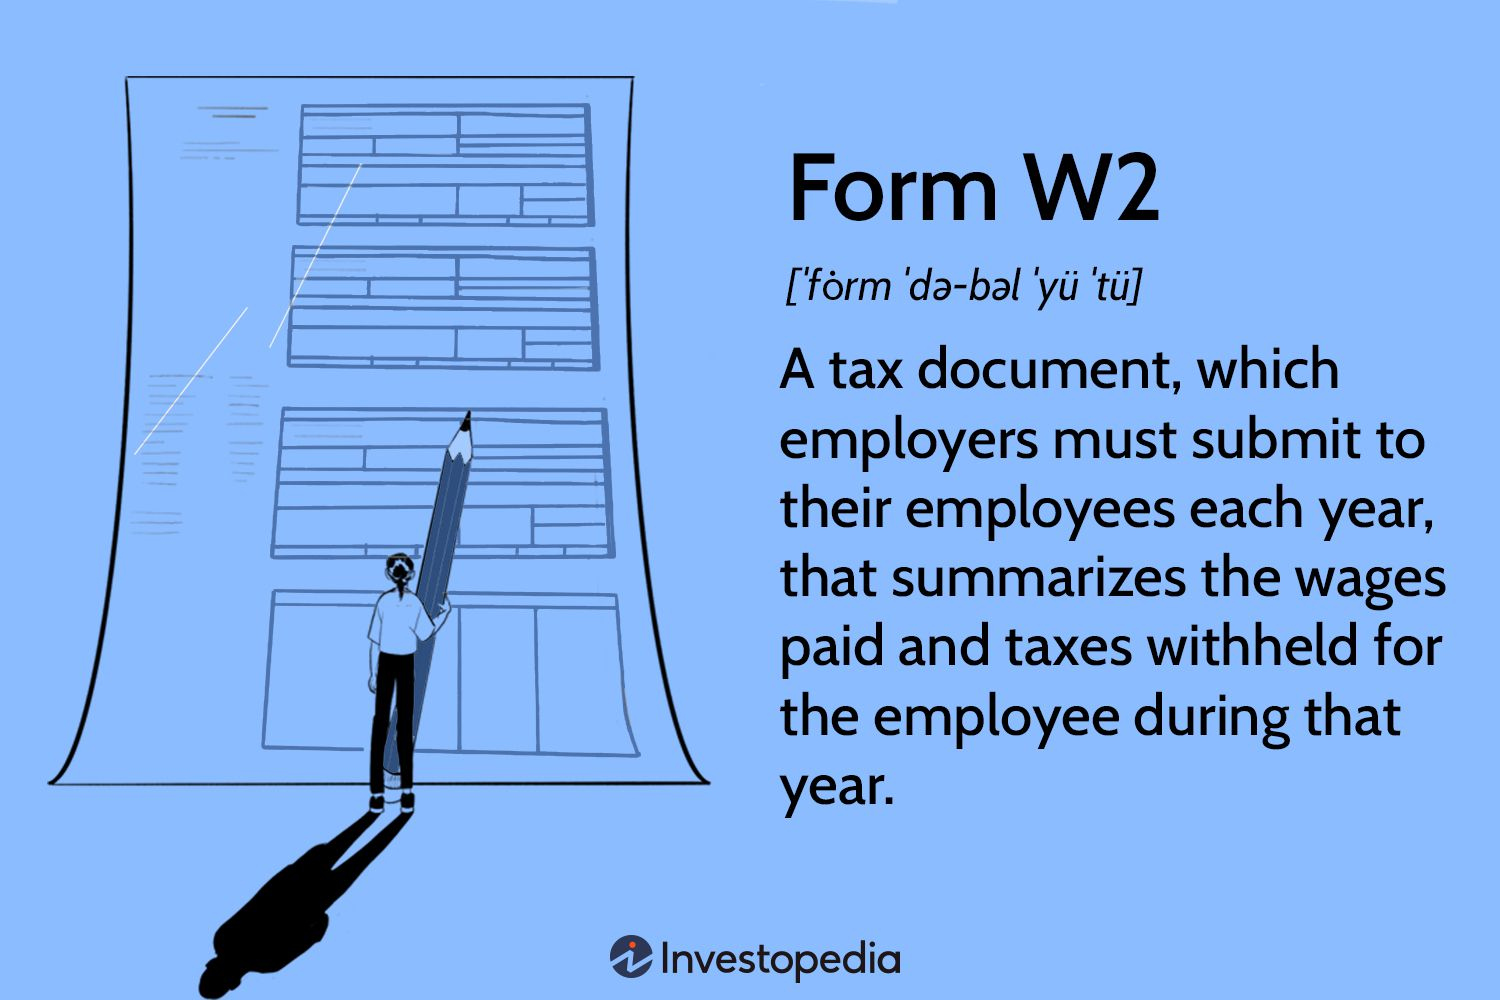 Form W-2 Wage And Tax Statement: What It Is And How To Read It regarding What Is W2 Form Used For